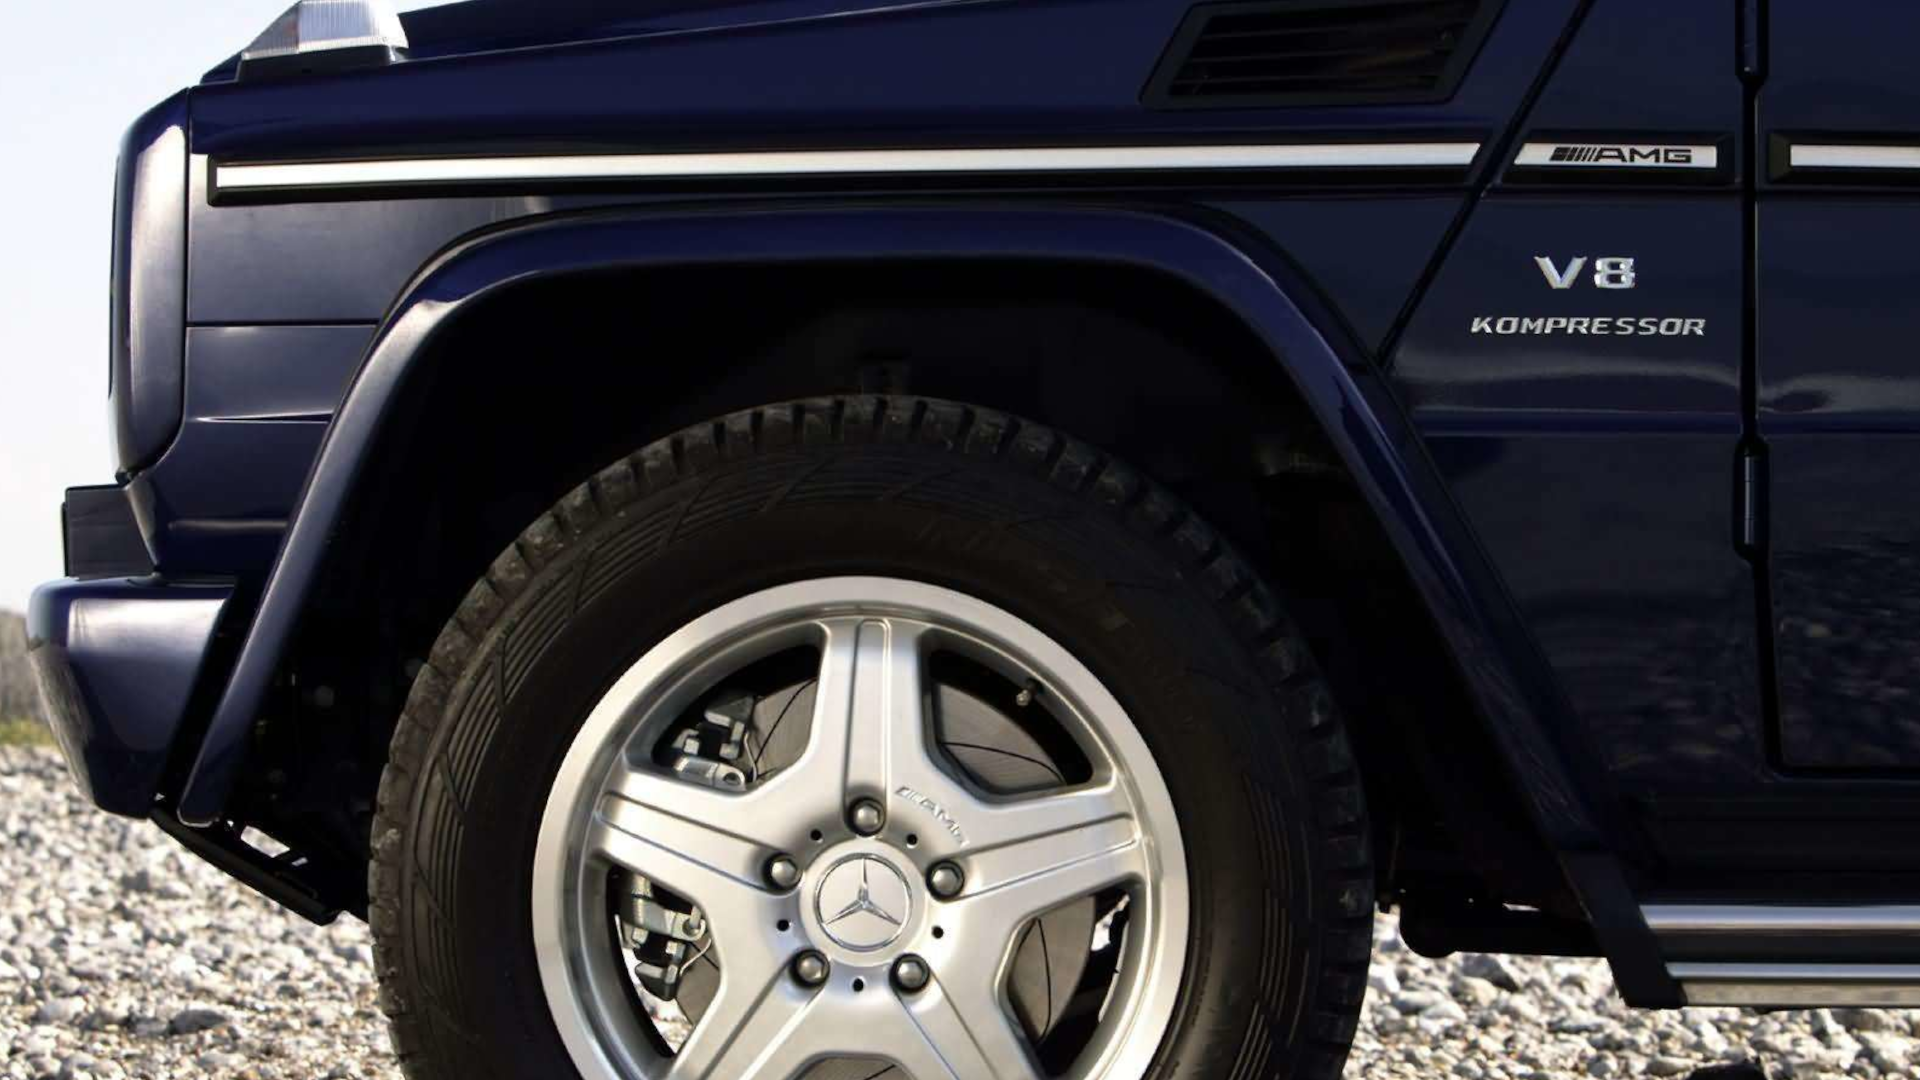 2005 Mercedes-Benz G55 AMG wheel and badge